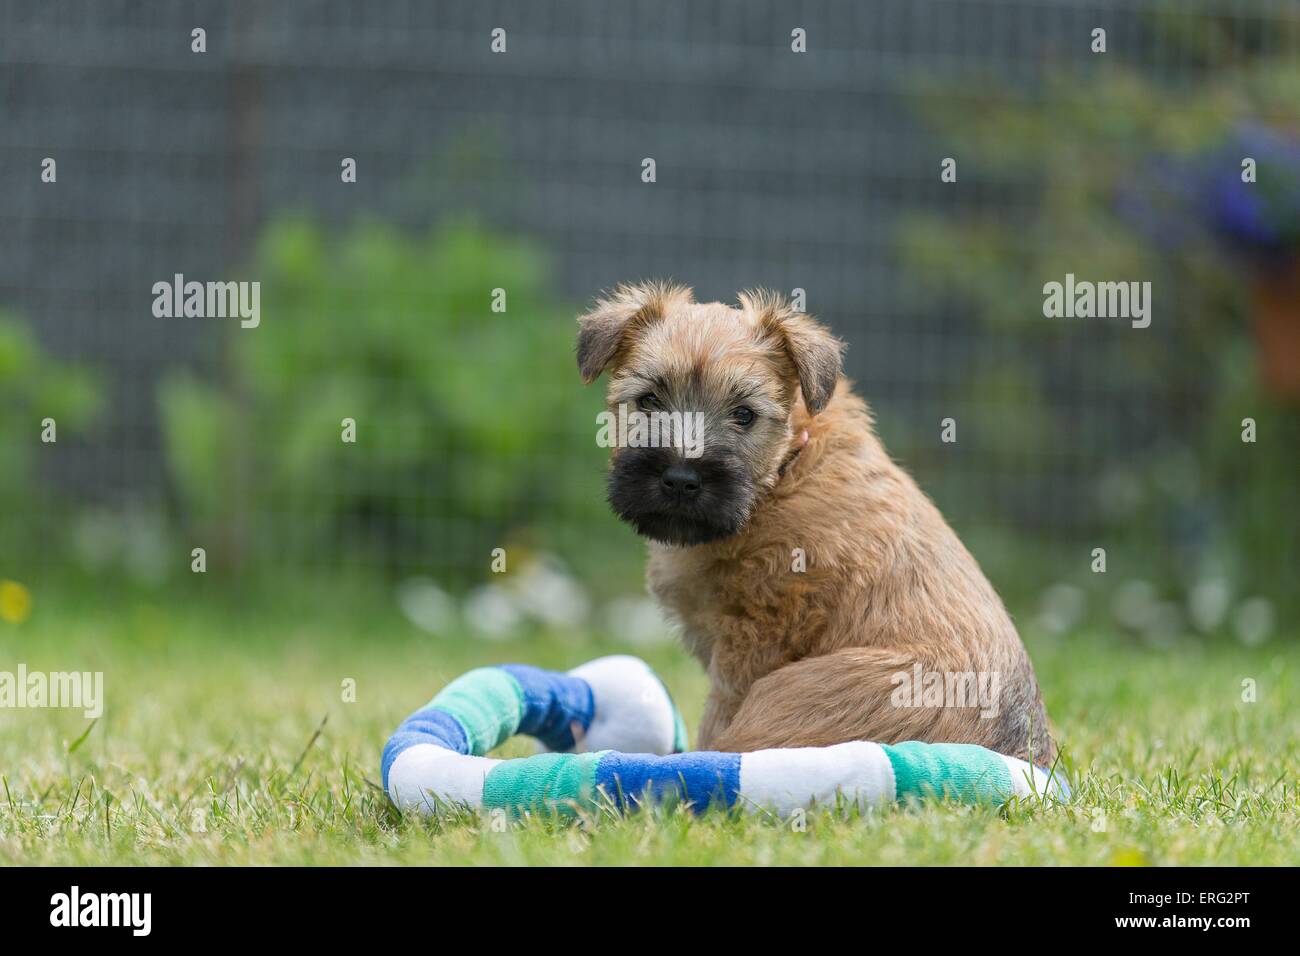 Irish Soft Coated Wheaten Terrier Puppy Banque D'Images